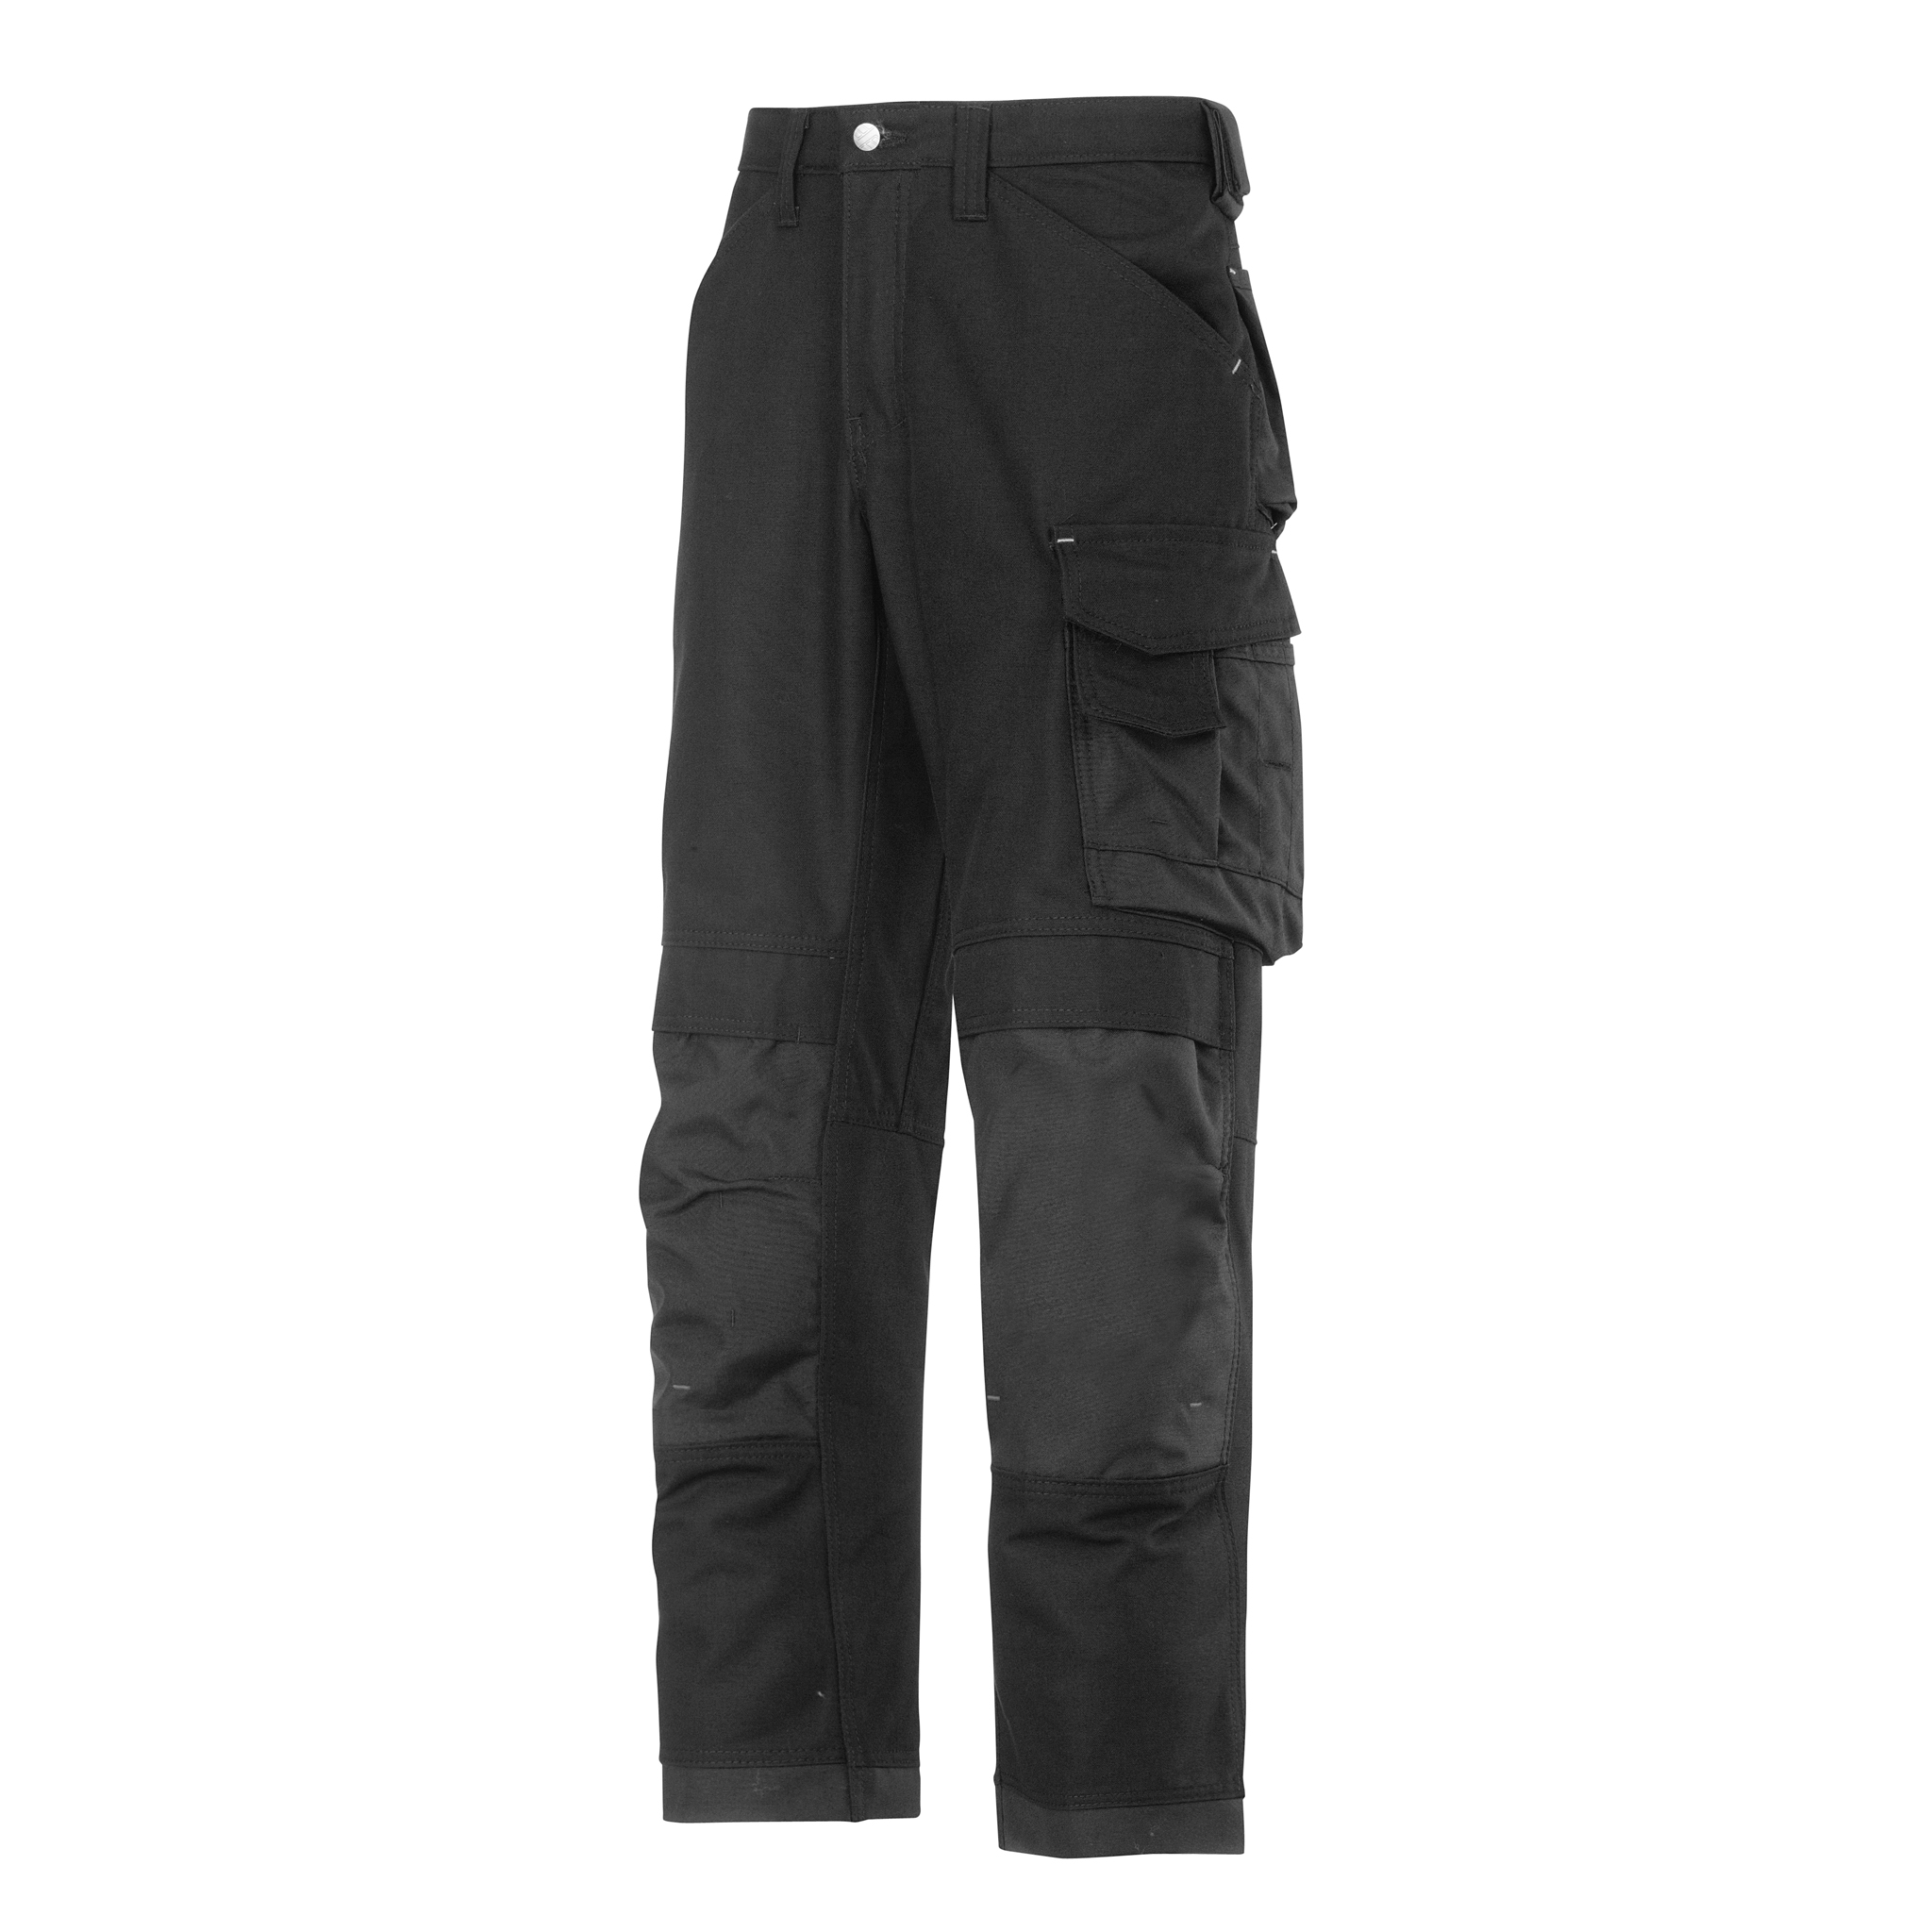 Snickers work trouser with yardstick